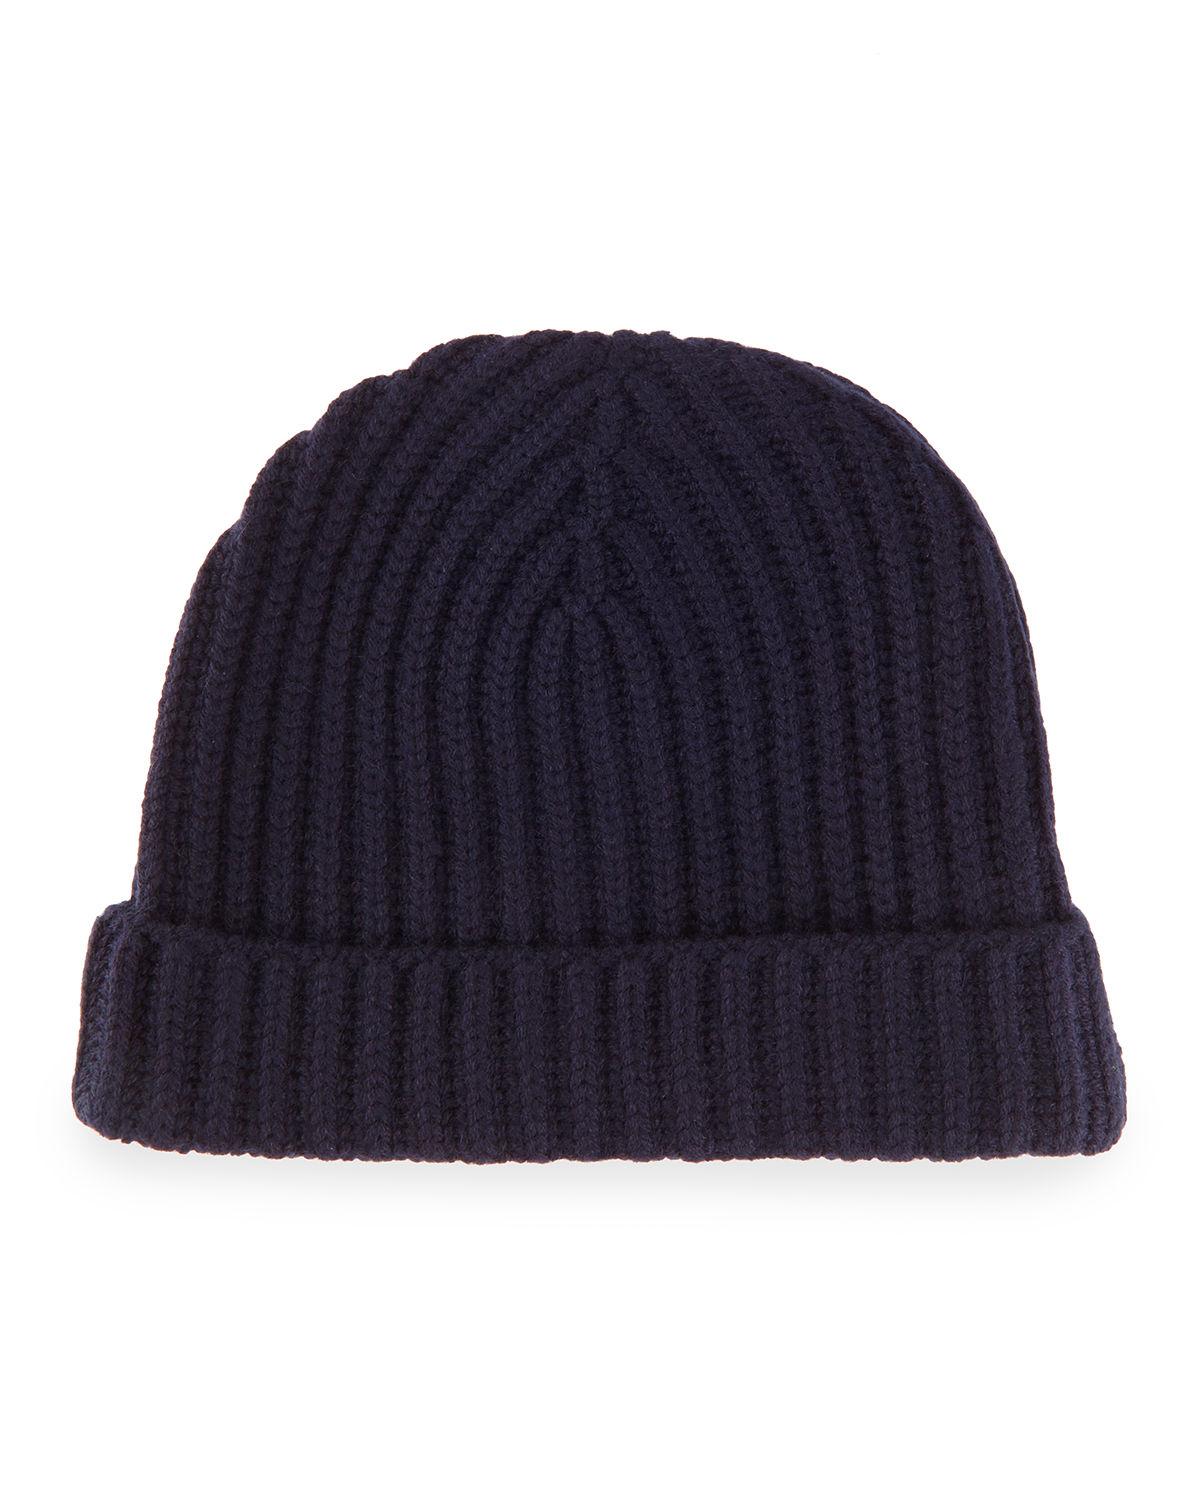 Loro Piana Ribbed Cashmere Beanie Hat in Blue for Men - Lyst